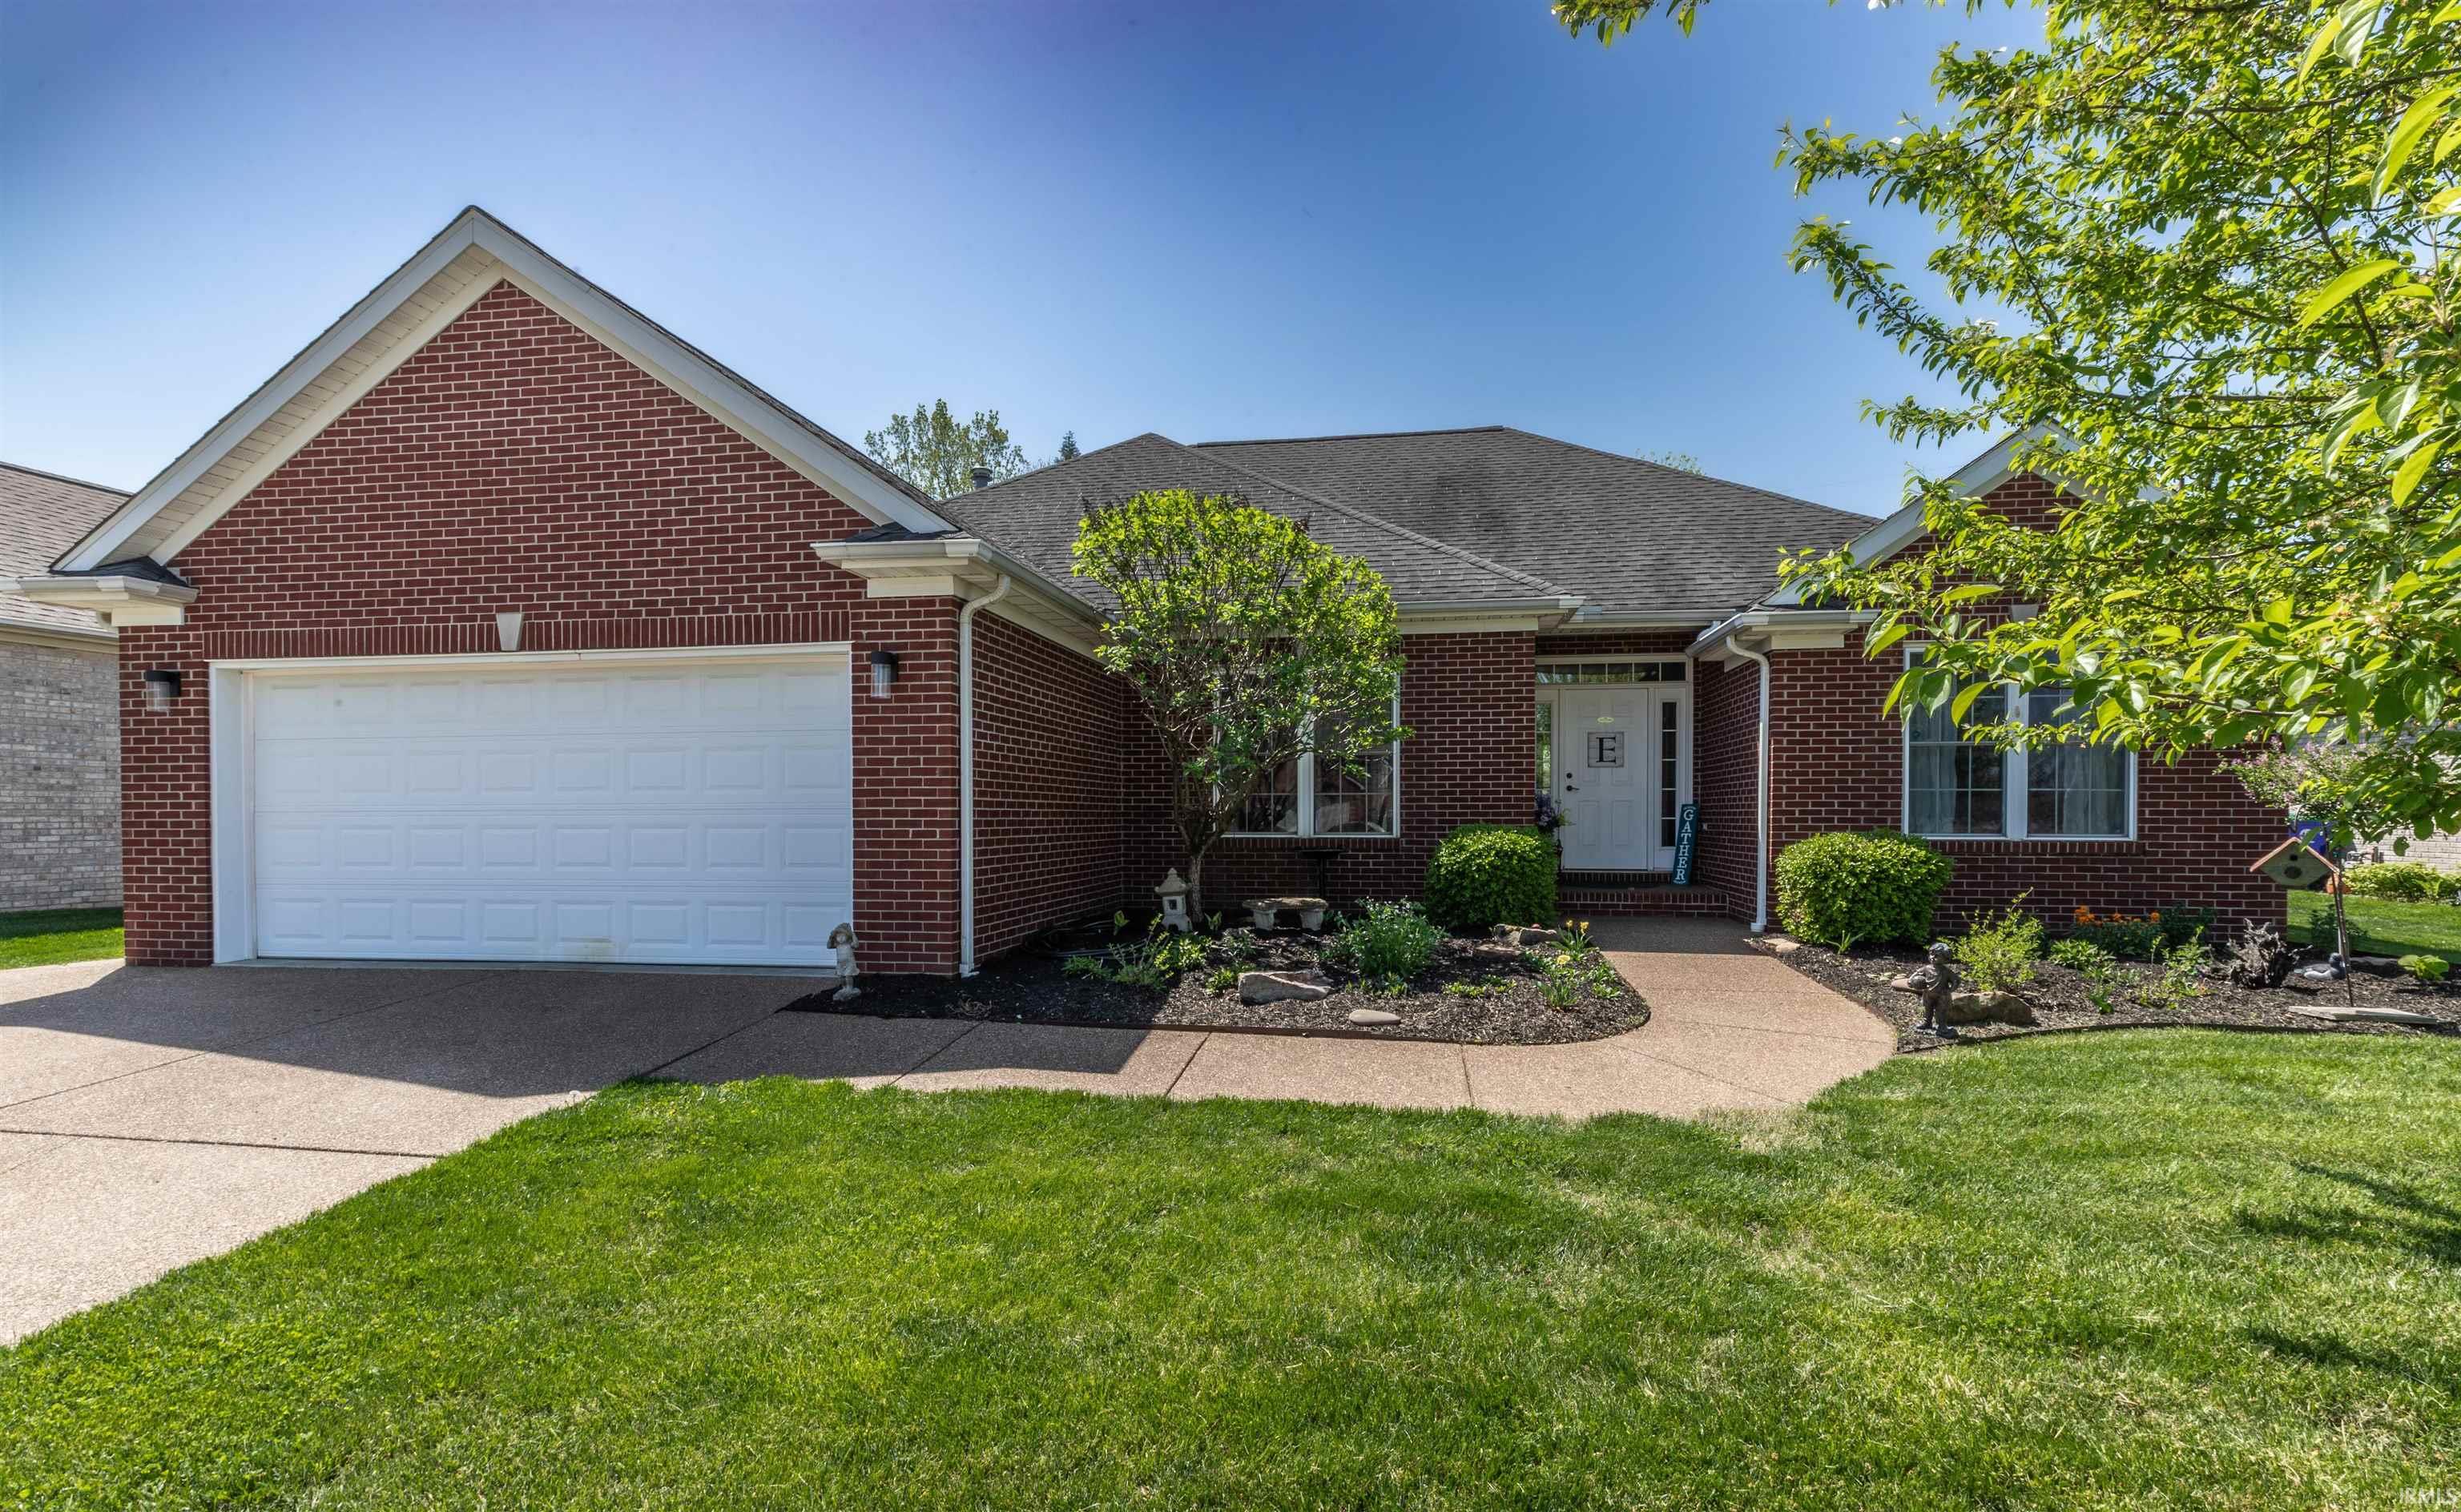 Timeless brick ranch in Windsor Pointe Subdivision. Location is very convenient and the floor plan flows with ease. Seller has made a ton of updates in this home and it shows. You will love the LTV flooring in main living areas of home, new ceiling fans throughout home. Greatroom with vaulted ceilings, gas fireplace and open to the kitchen. Breakfast nook with sliding doors leading to aggregate patio and storage shed with additional entertaining patio. Kitchen features castle style cherry finished cabinets, pantry with shelving, recessed lighting, curved breakfast bar and comes fully equipped with all stainless appliances.  The split floor plan is ideal and you will notice all the bedrooms come with walk-in closets. Primary bedroom features large window for nice natural lighting, master bath with jetted tub, standing shower and double vanities. Spare bedrooms also feature updated carpeting and both are equal in size. Hall bath with tub/shower combo. Other nice amenities of home included: formal dining with crown molding, all walls and trim including inside of garage painted  2022, new garage door opener equipped with camera, newer smart thermostat, all outlets ands switches replaced, duct work cleaned in 2022, attic storage in garage, LED lights and more. Seller is providing 1 year home warranty for buyer.